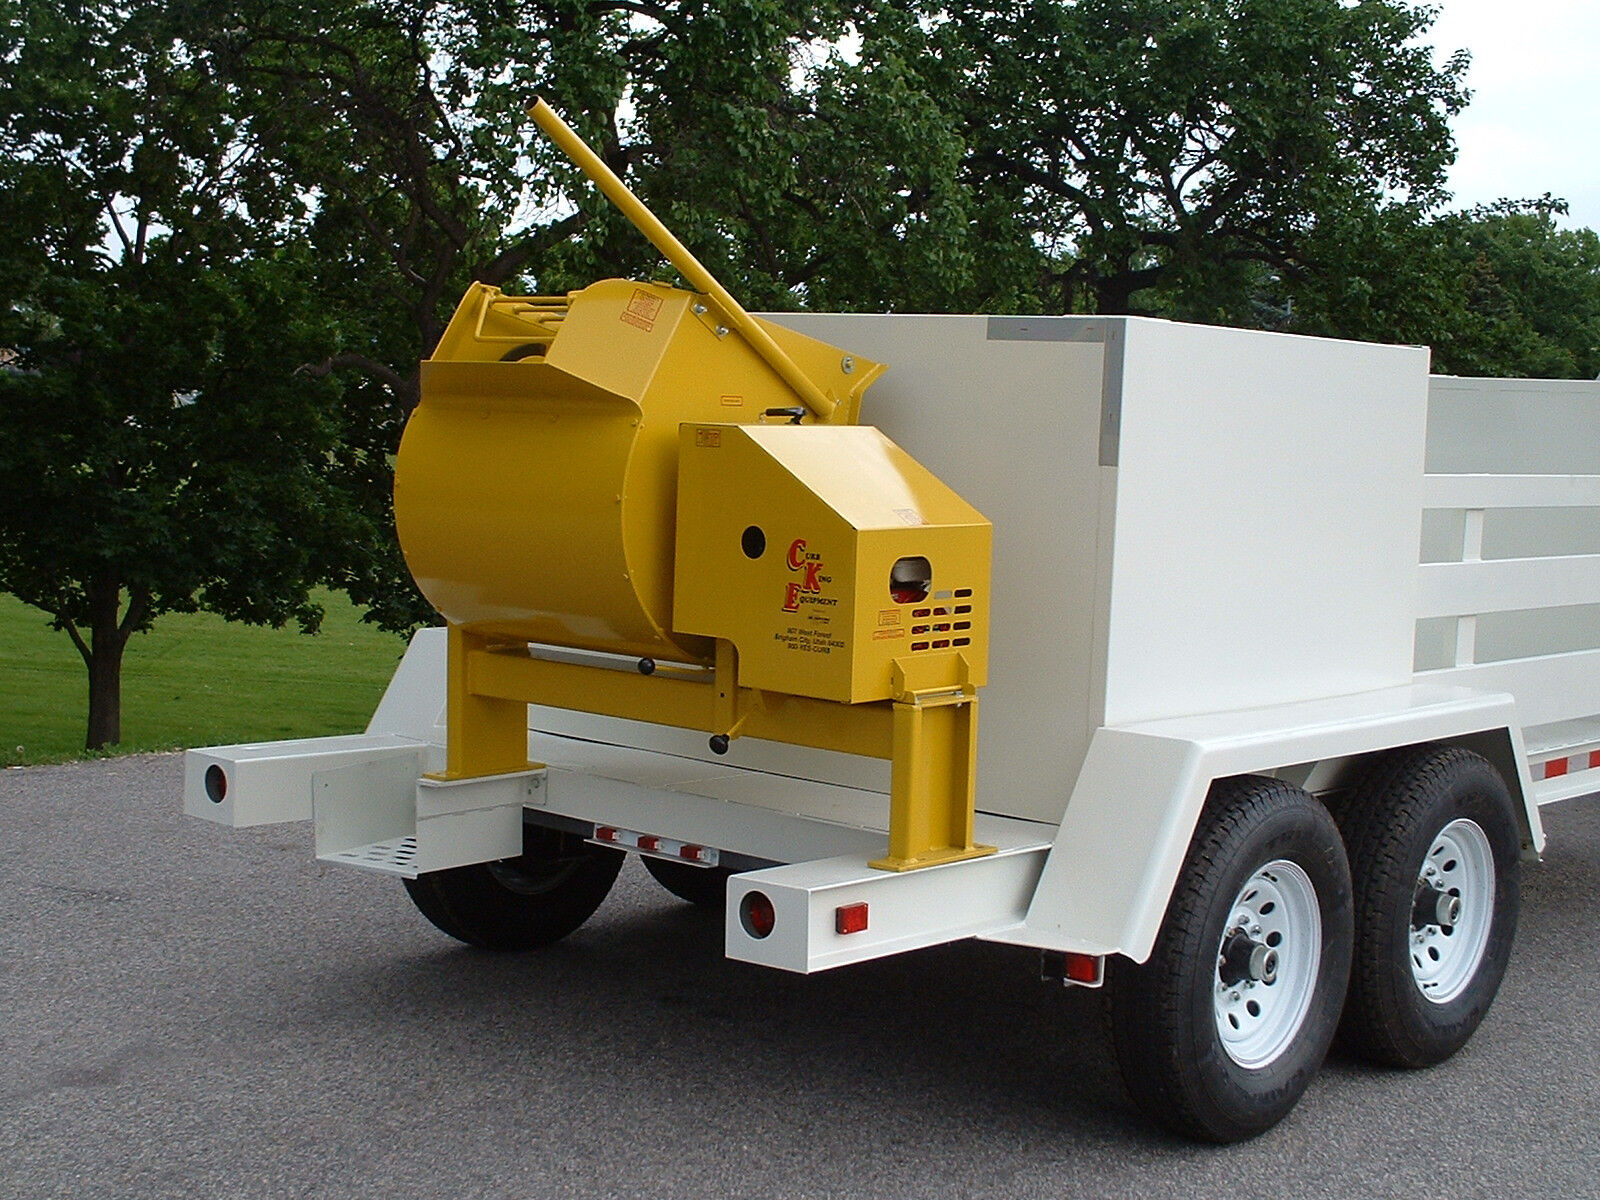 NEW  9 cubic foot Mortar/Cement Mixer from Curb King